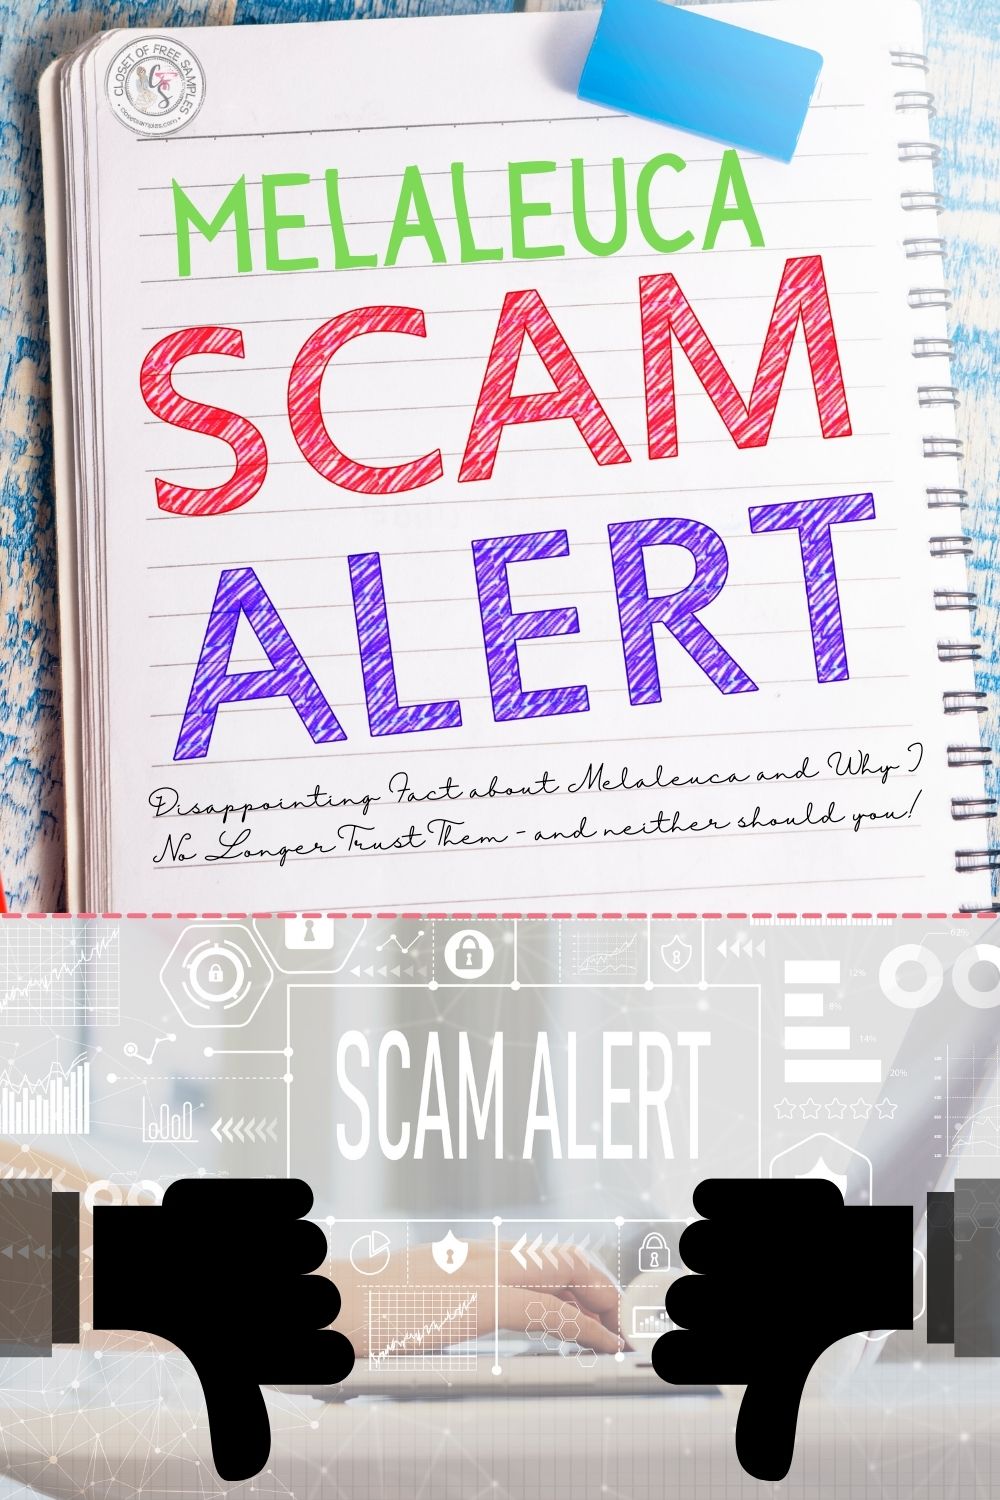 Disappointing Fact about Melaleuca Why I No Longer Trust Them scam closetsamples pinterest